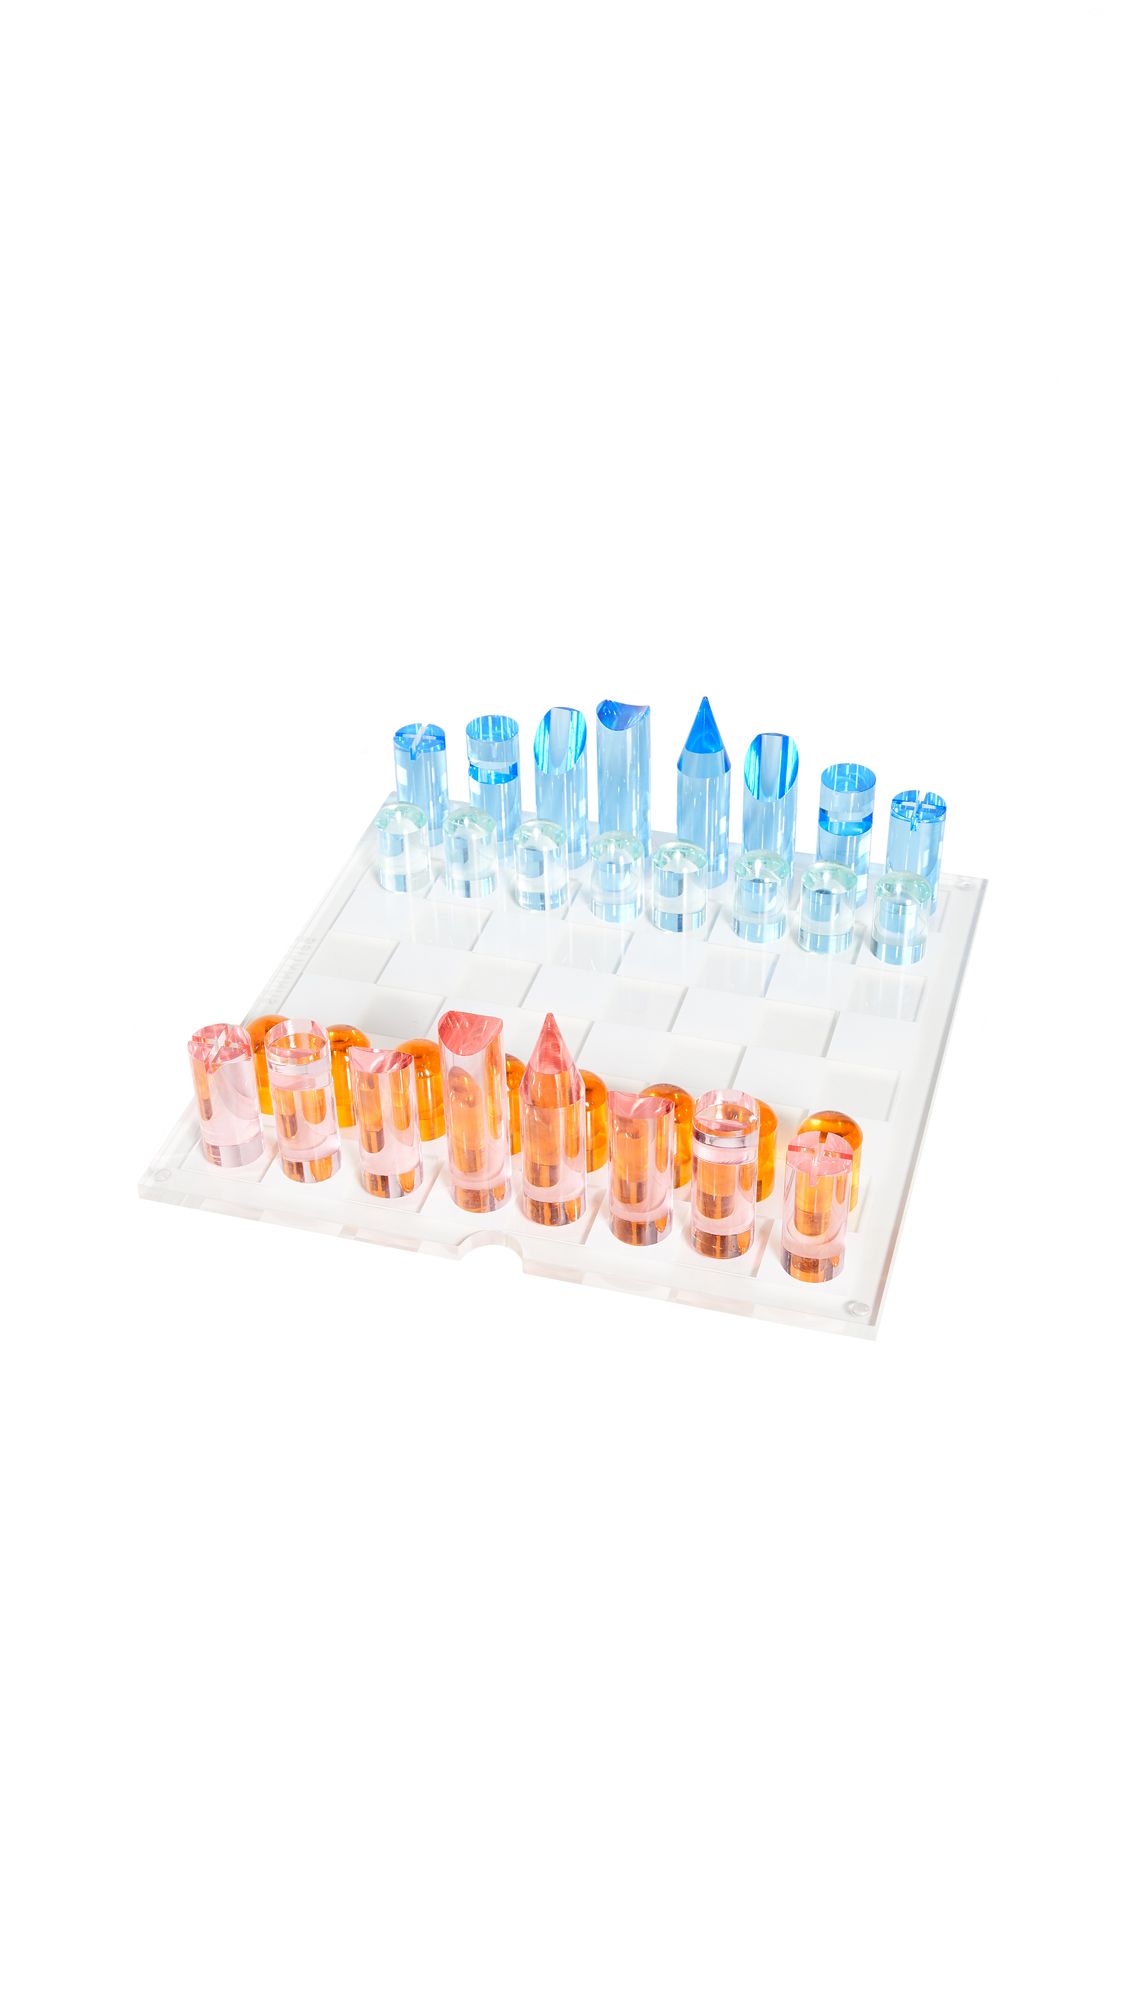 SunnyLife Lucite Chess + Checkers | Shopbop